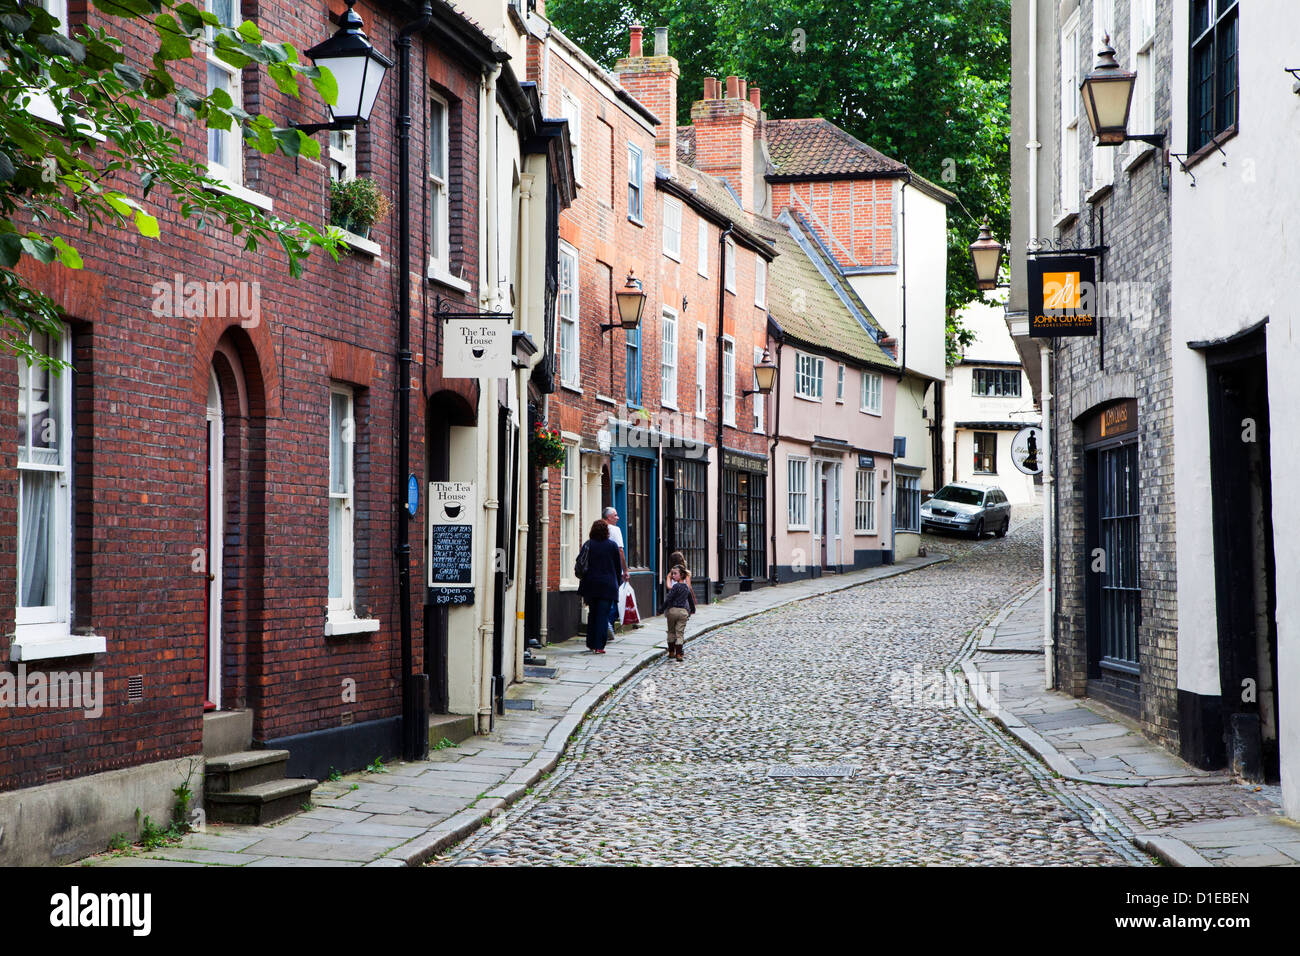 Elm Hill, Norwich, Norfolk, Angleterre, Royaume-Uni, Europe Banque D'Images